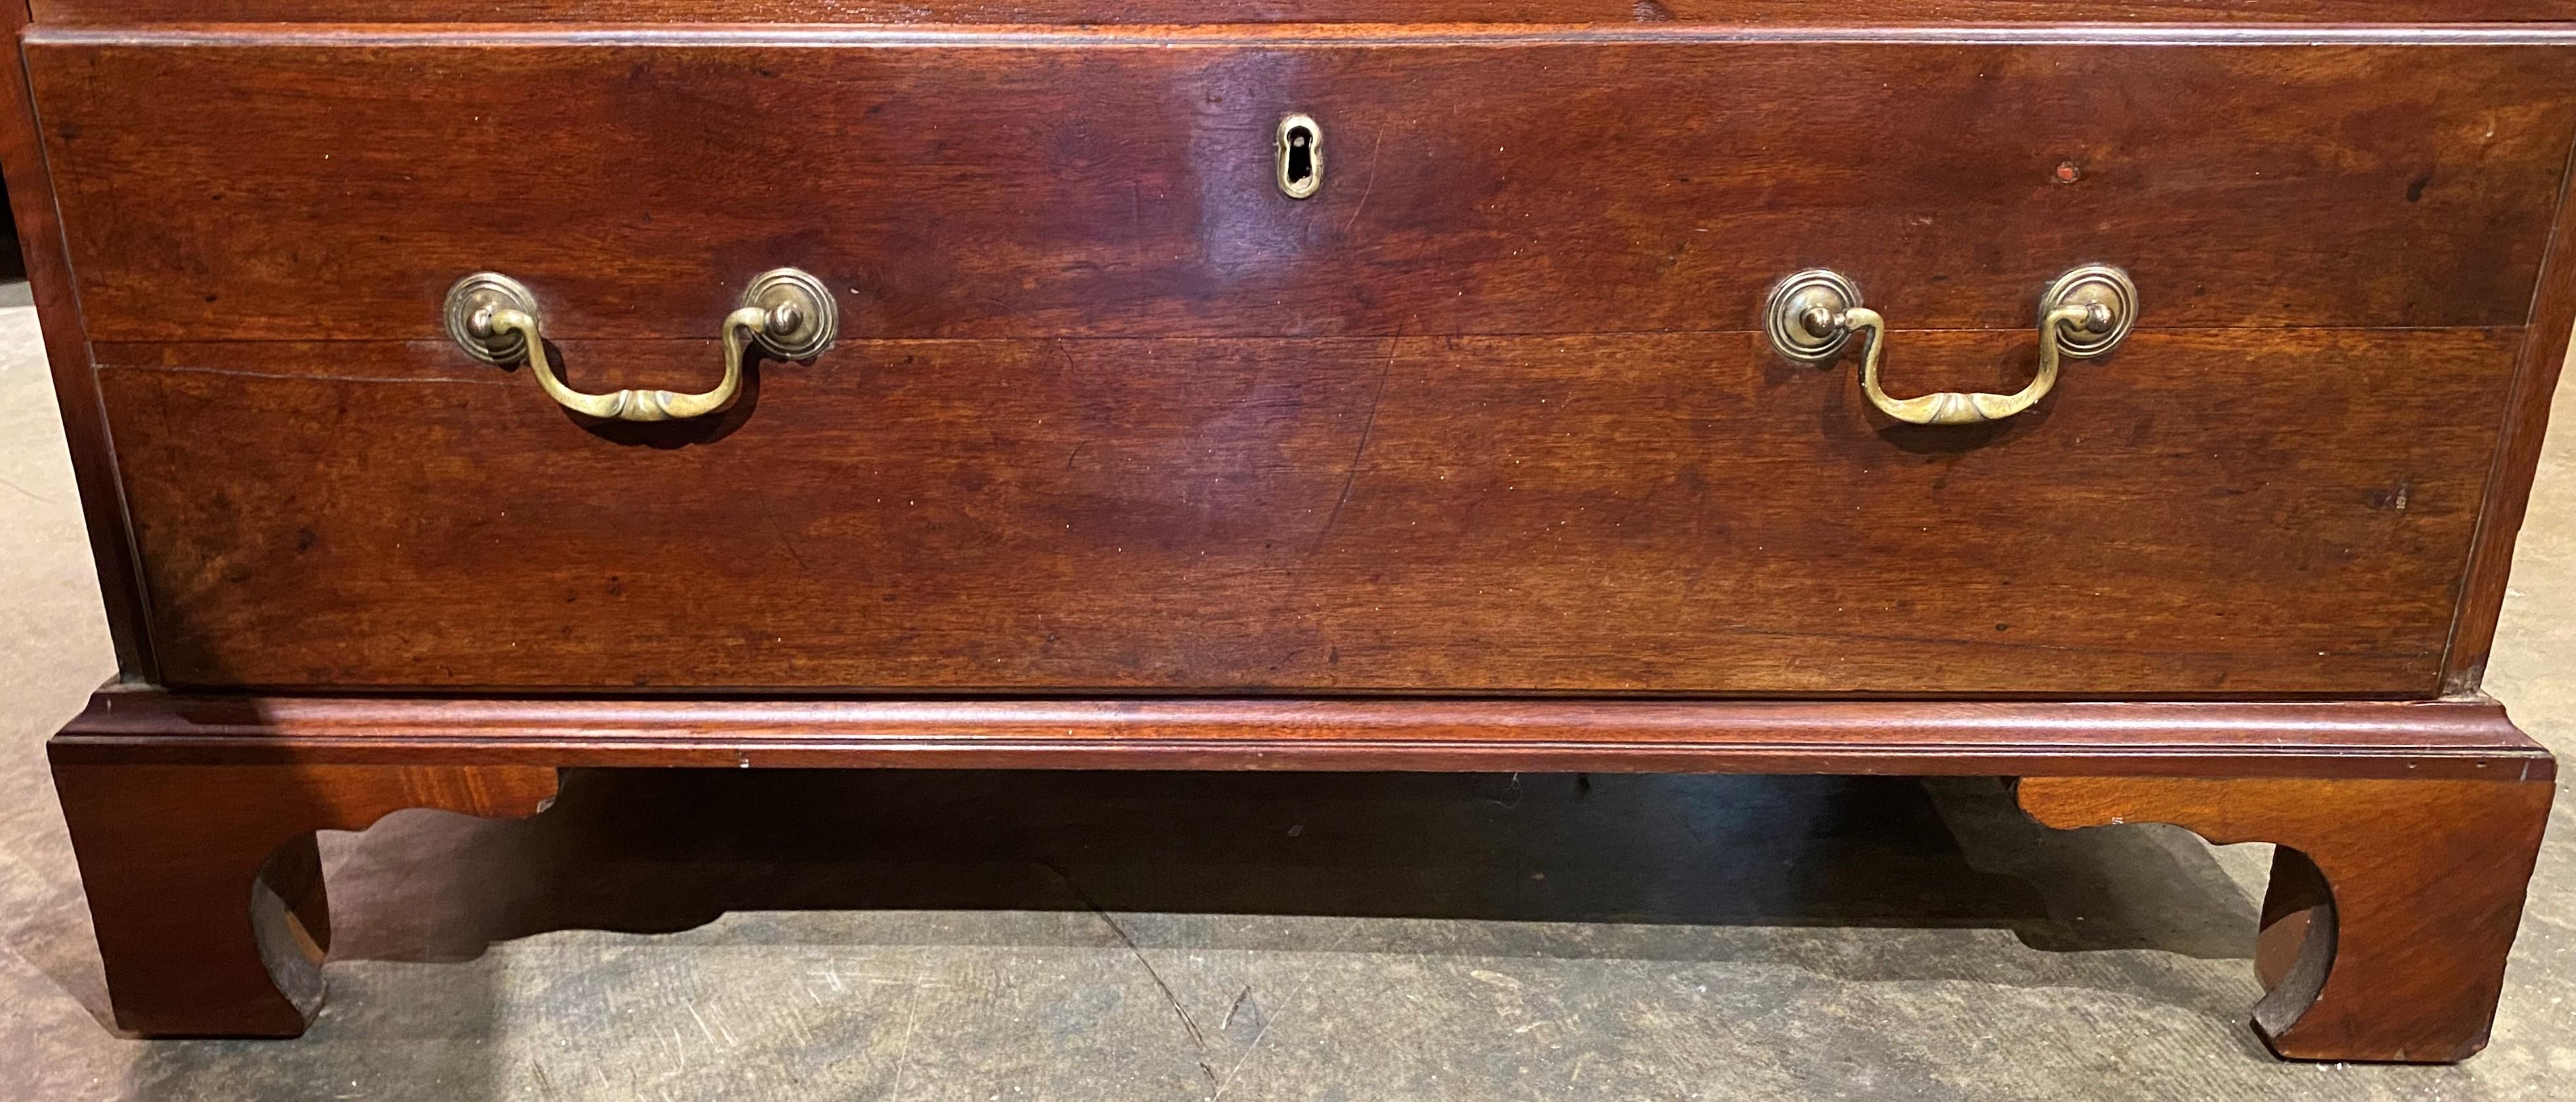 18th Century Late 18th C Walnut Seven Drawer Tall Chest, Probably Maryland or Pennsylvania